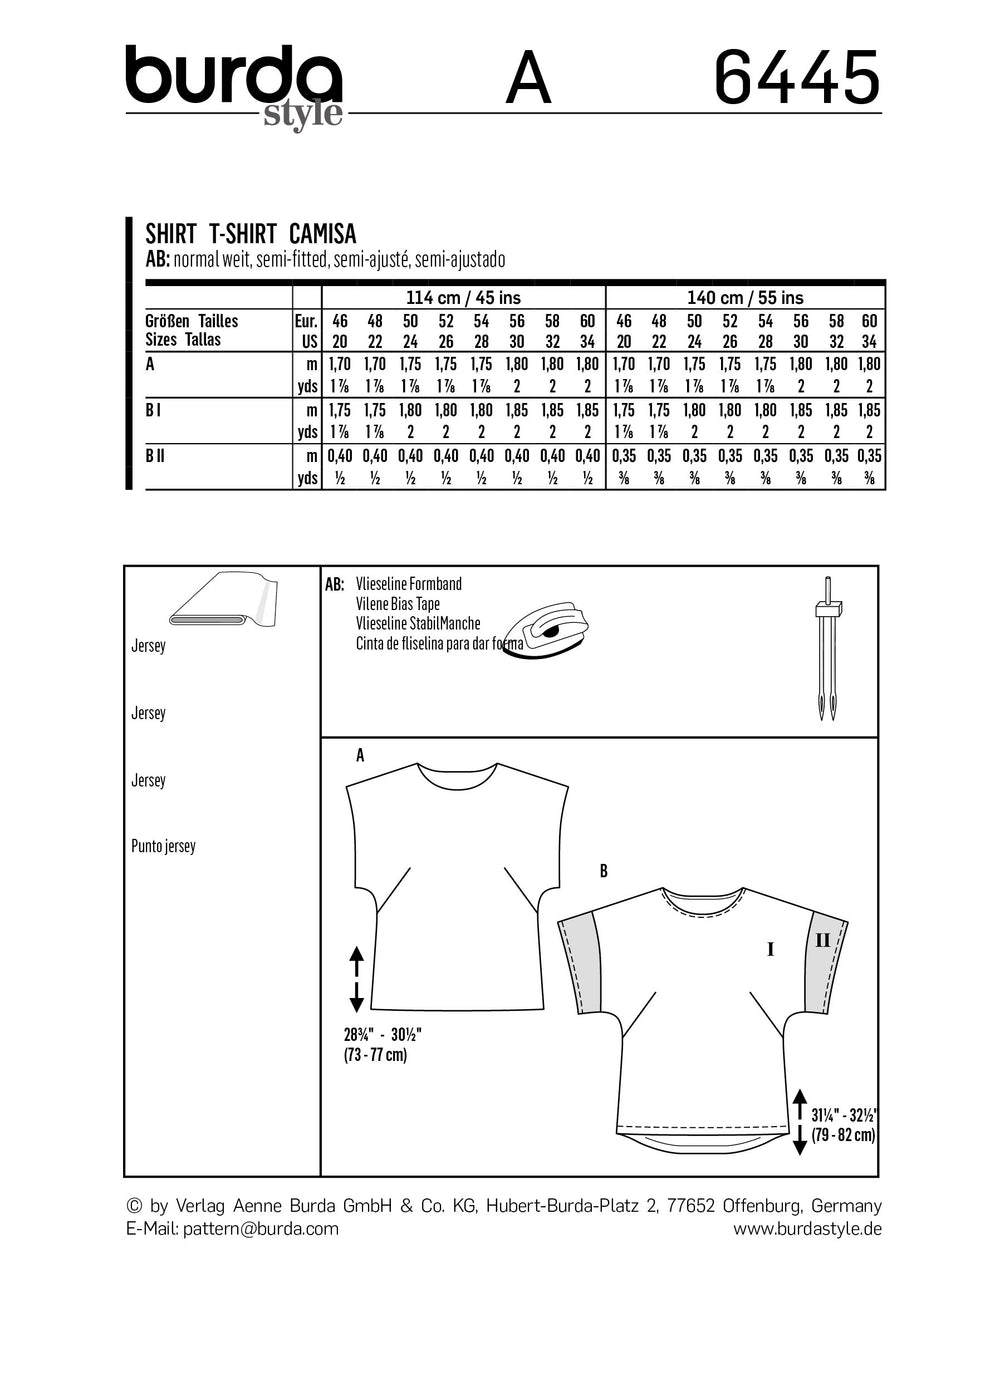 BD6445 Women's Simple Tops Pattern from Jaycotts Sewing Supplies